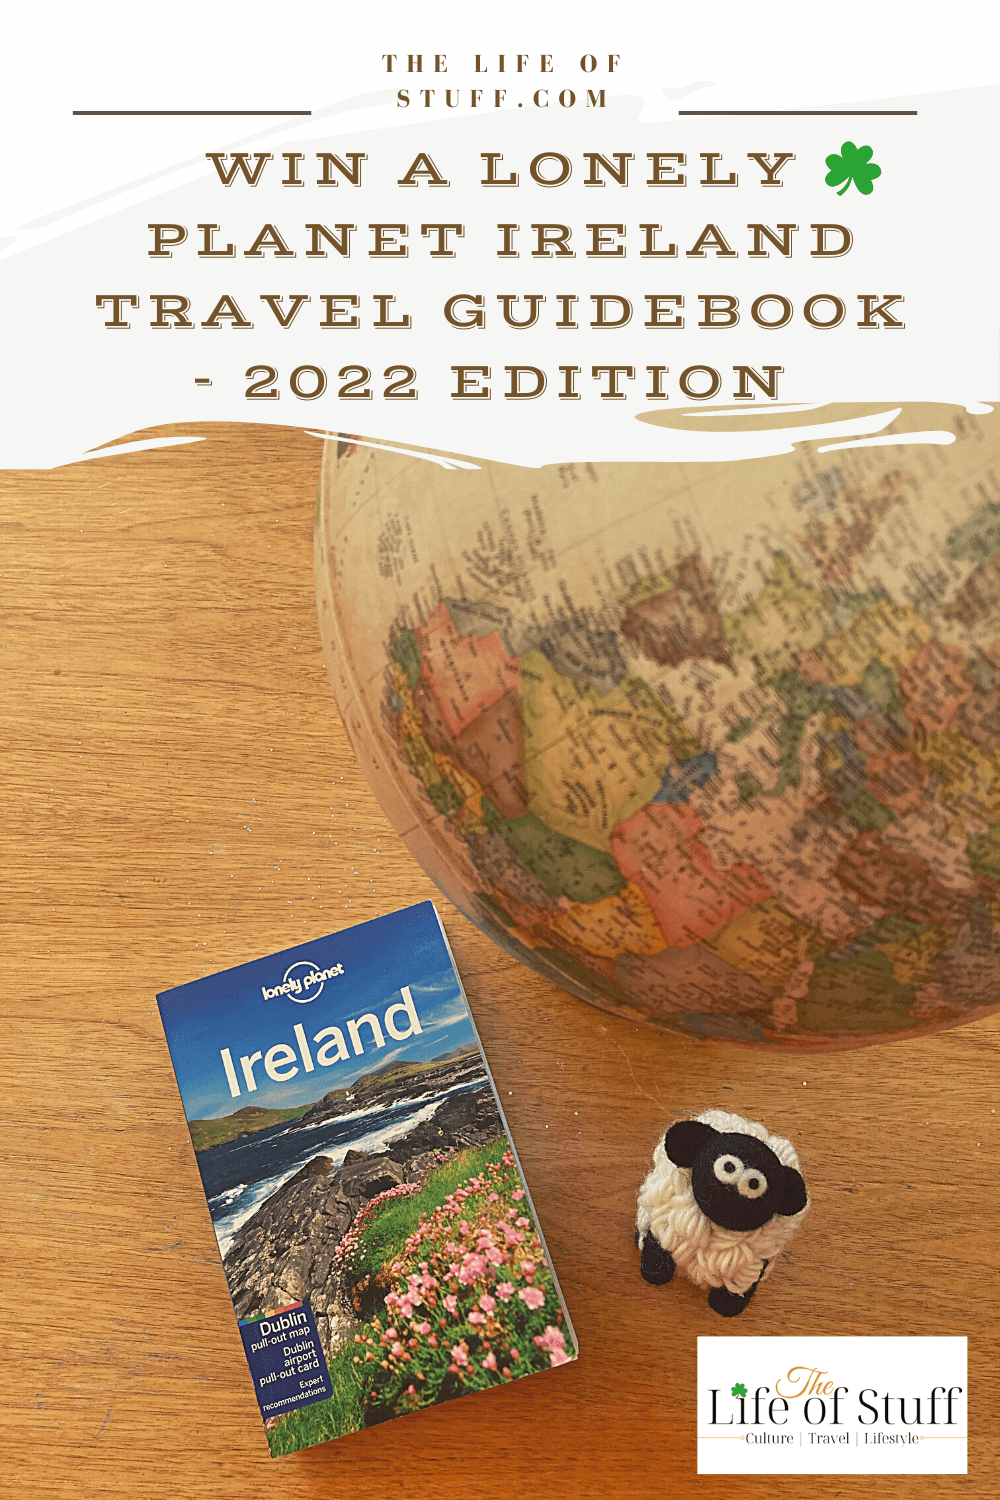 WIN a Lonely Planet Ireland Travel Guidebook – 2022 Edition - The LIfe of Stuff.com - Giveaway